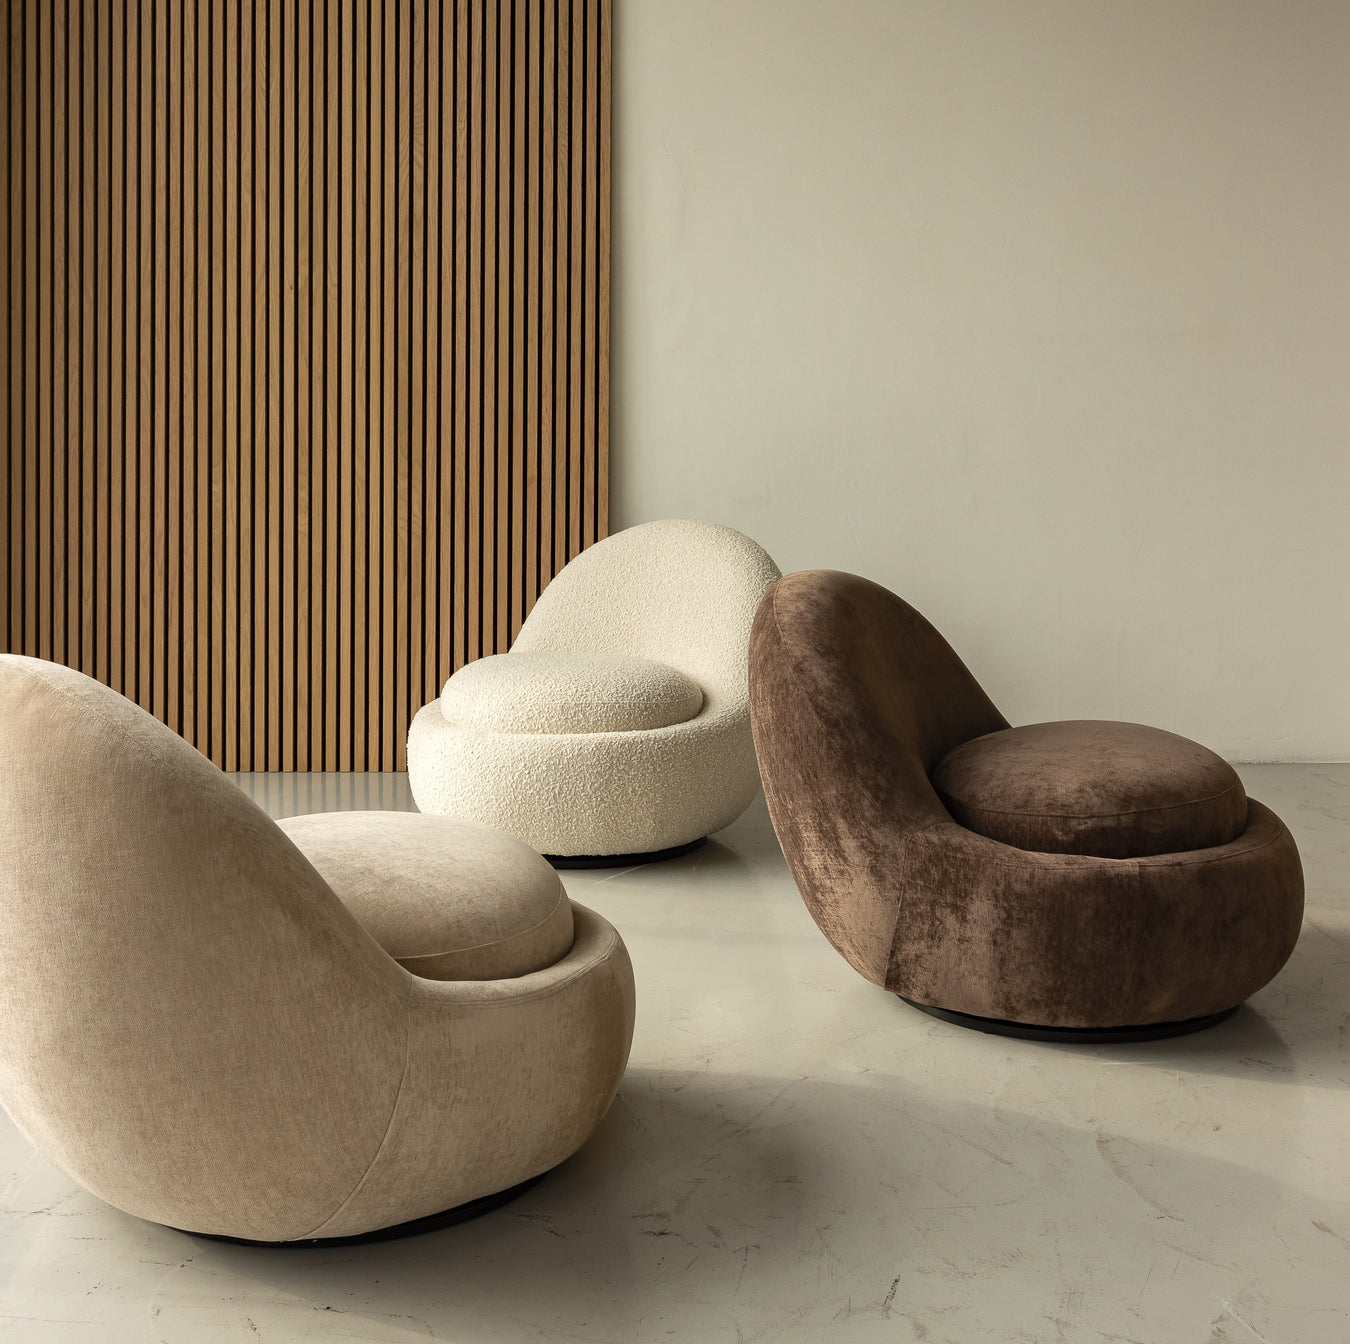 Top modern minimalist Danish chairs for contemporary spaces